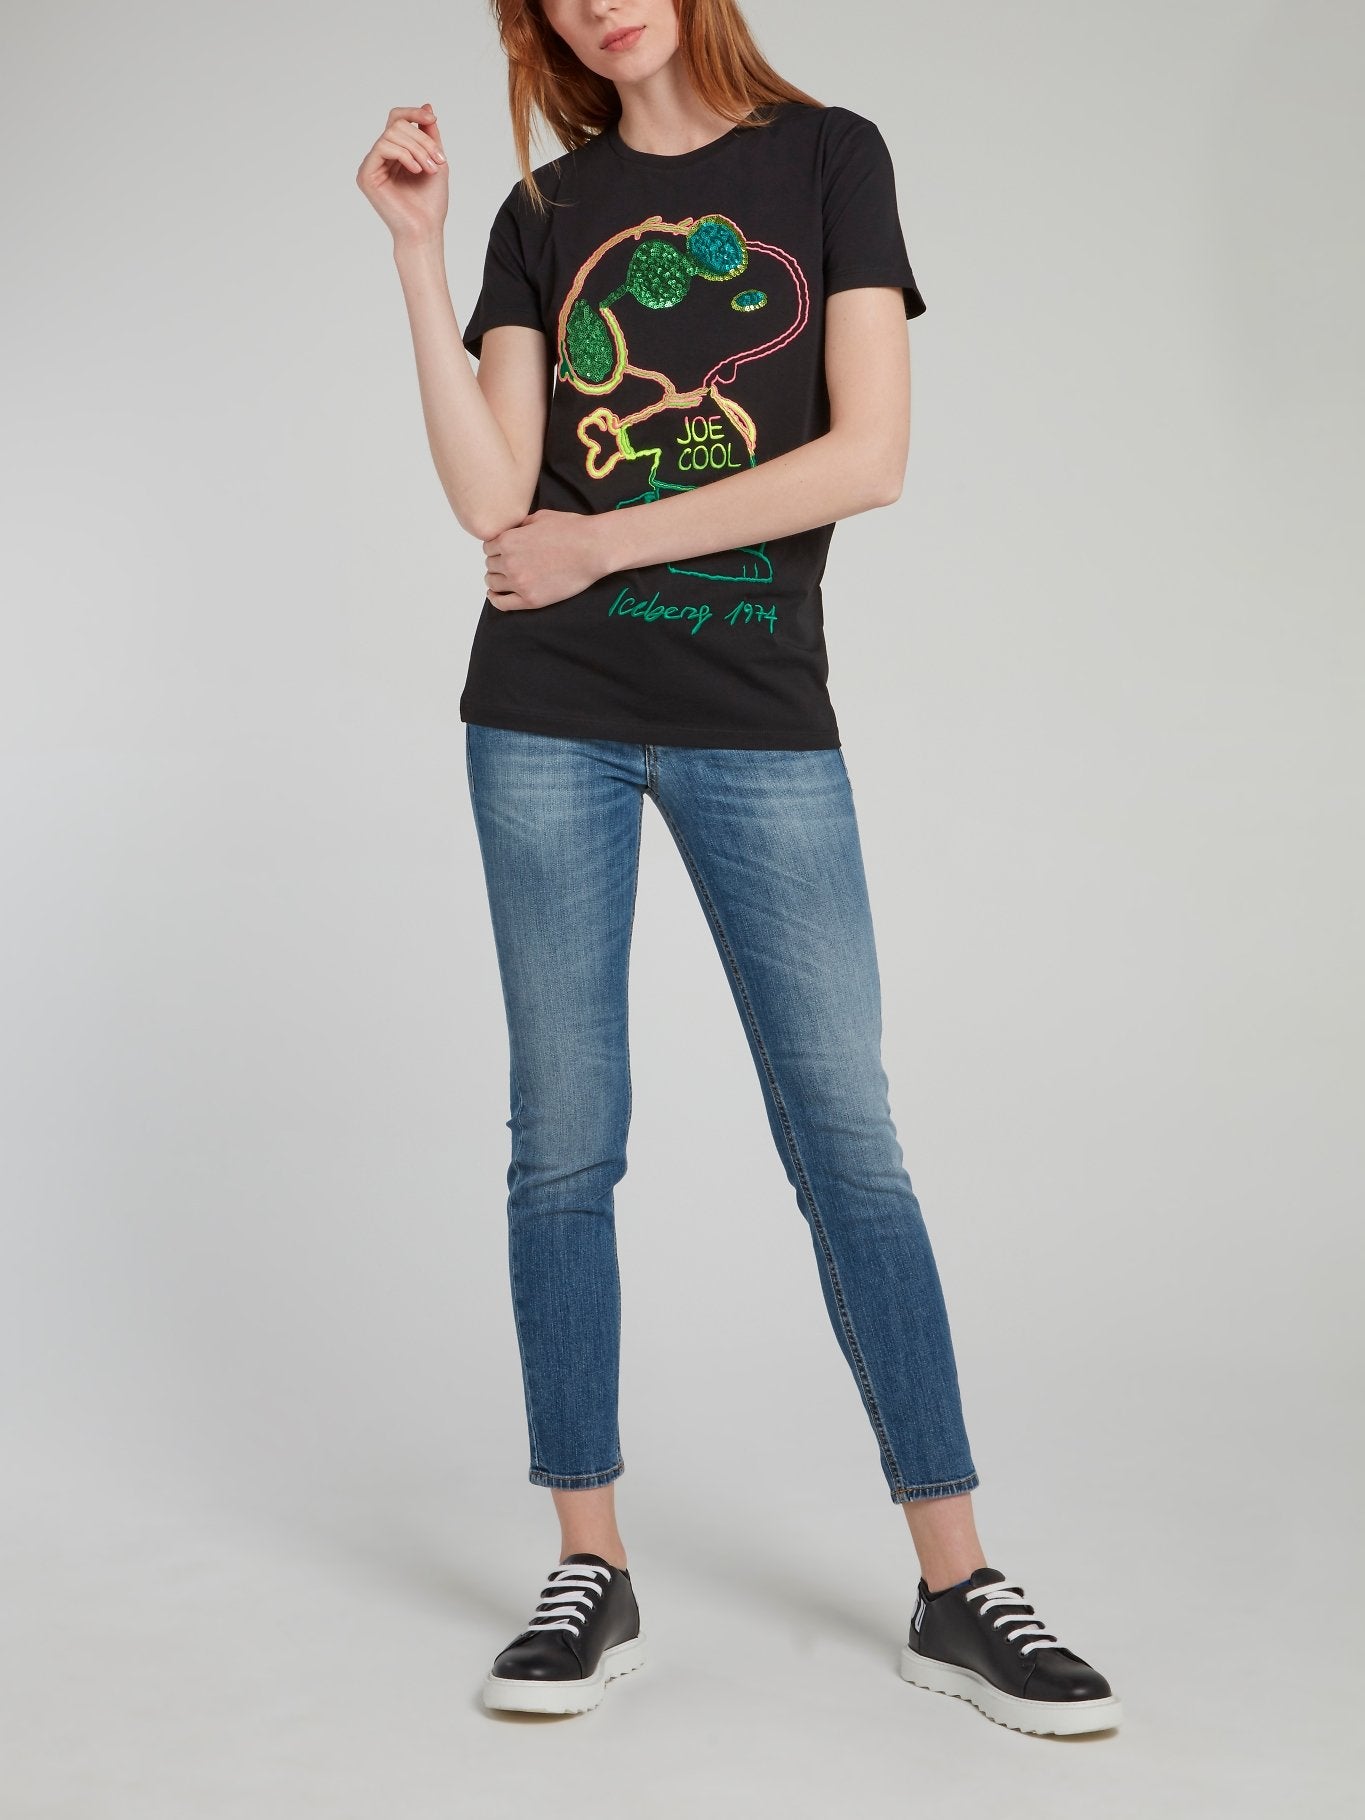 Sequin Embellished Snoopy T-Shirt